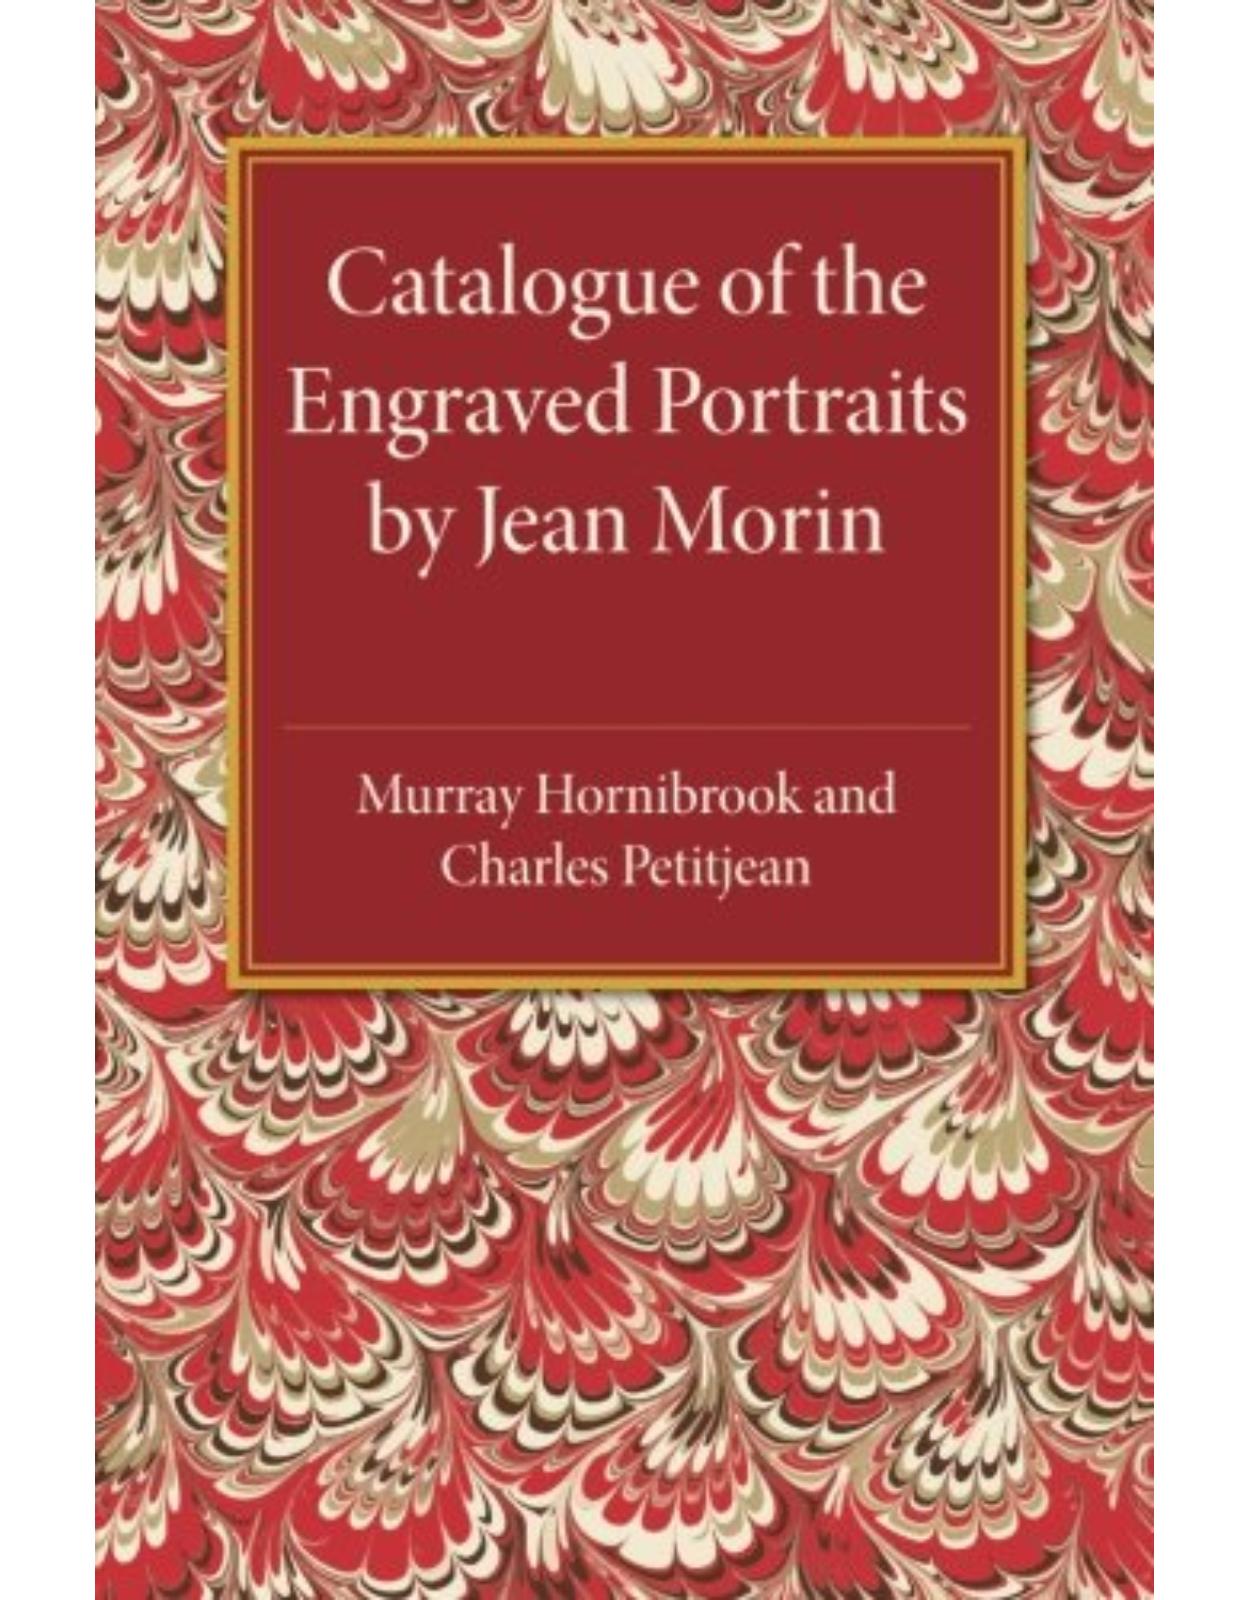 Catalogue of the Engraved Portraits by Jean Morin: (c.1590-1650)